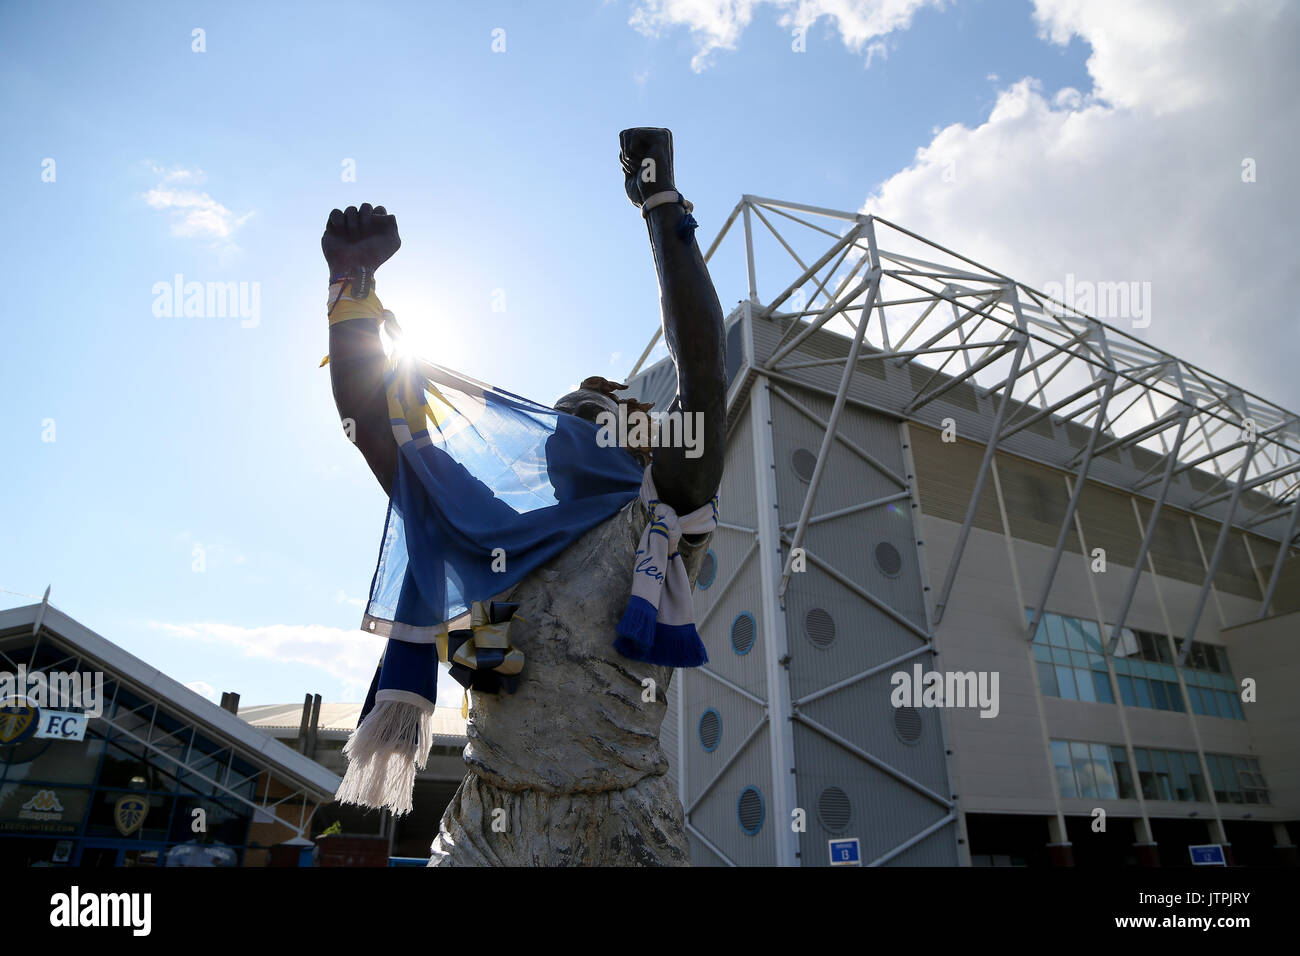 The Billy Bremner statue outside Elland Road before the Carabao Cup, First Round match between Leeds United and Port Vale. PRESS ASSOCIATION Photo. Picture date: Wednesday August 9, 2017. See PA story SOCCER Leeds. Photo credit should read: Richard Sellers/PA Wire. RESTRICTIONS: No use with unauthorised audio, video, data, fixture lists, club/league logos or 'live' services. Online in-match use limited to 75 images, no video emulation. No use in betting, games or single club/league/player publications. Stock Photo